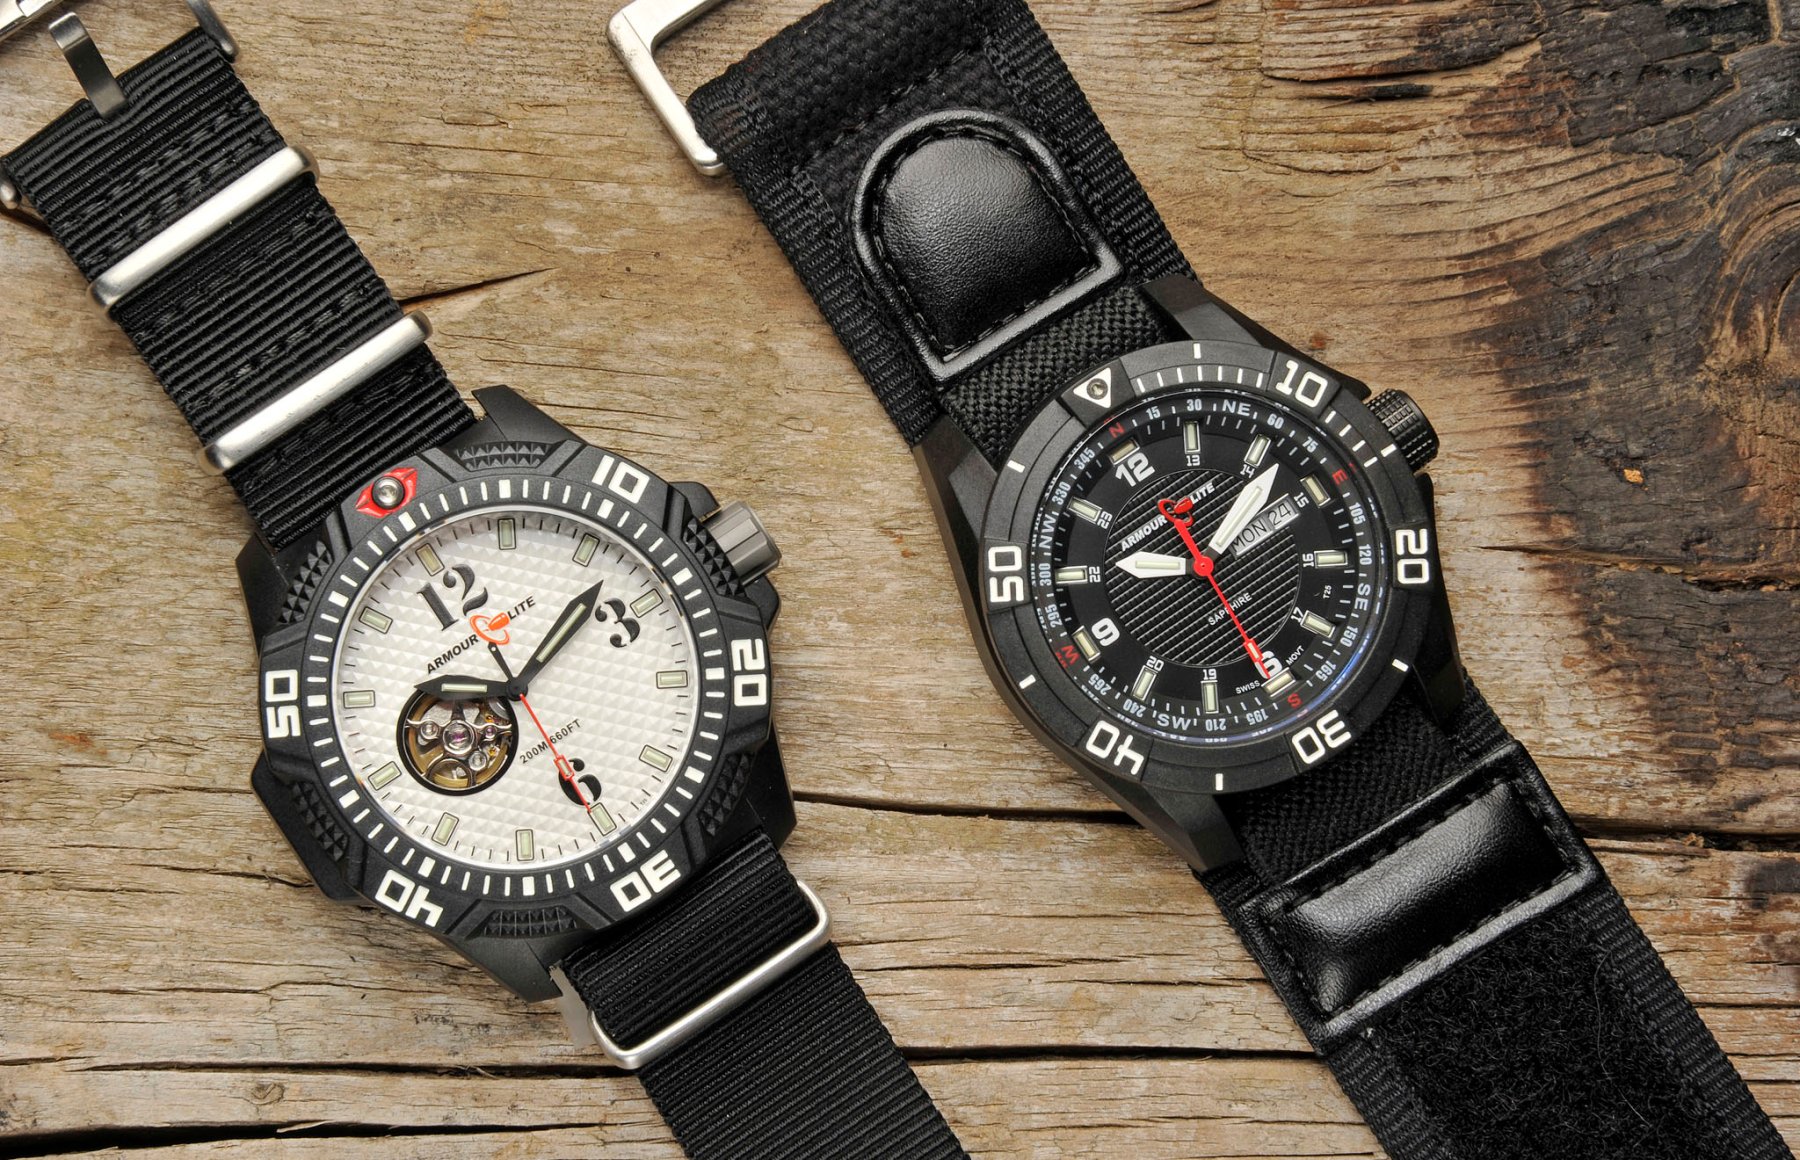 ArmourLite AL-1021 and AL-1202 wrist watches | all4shooters